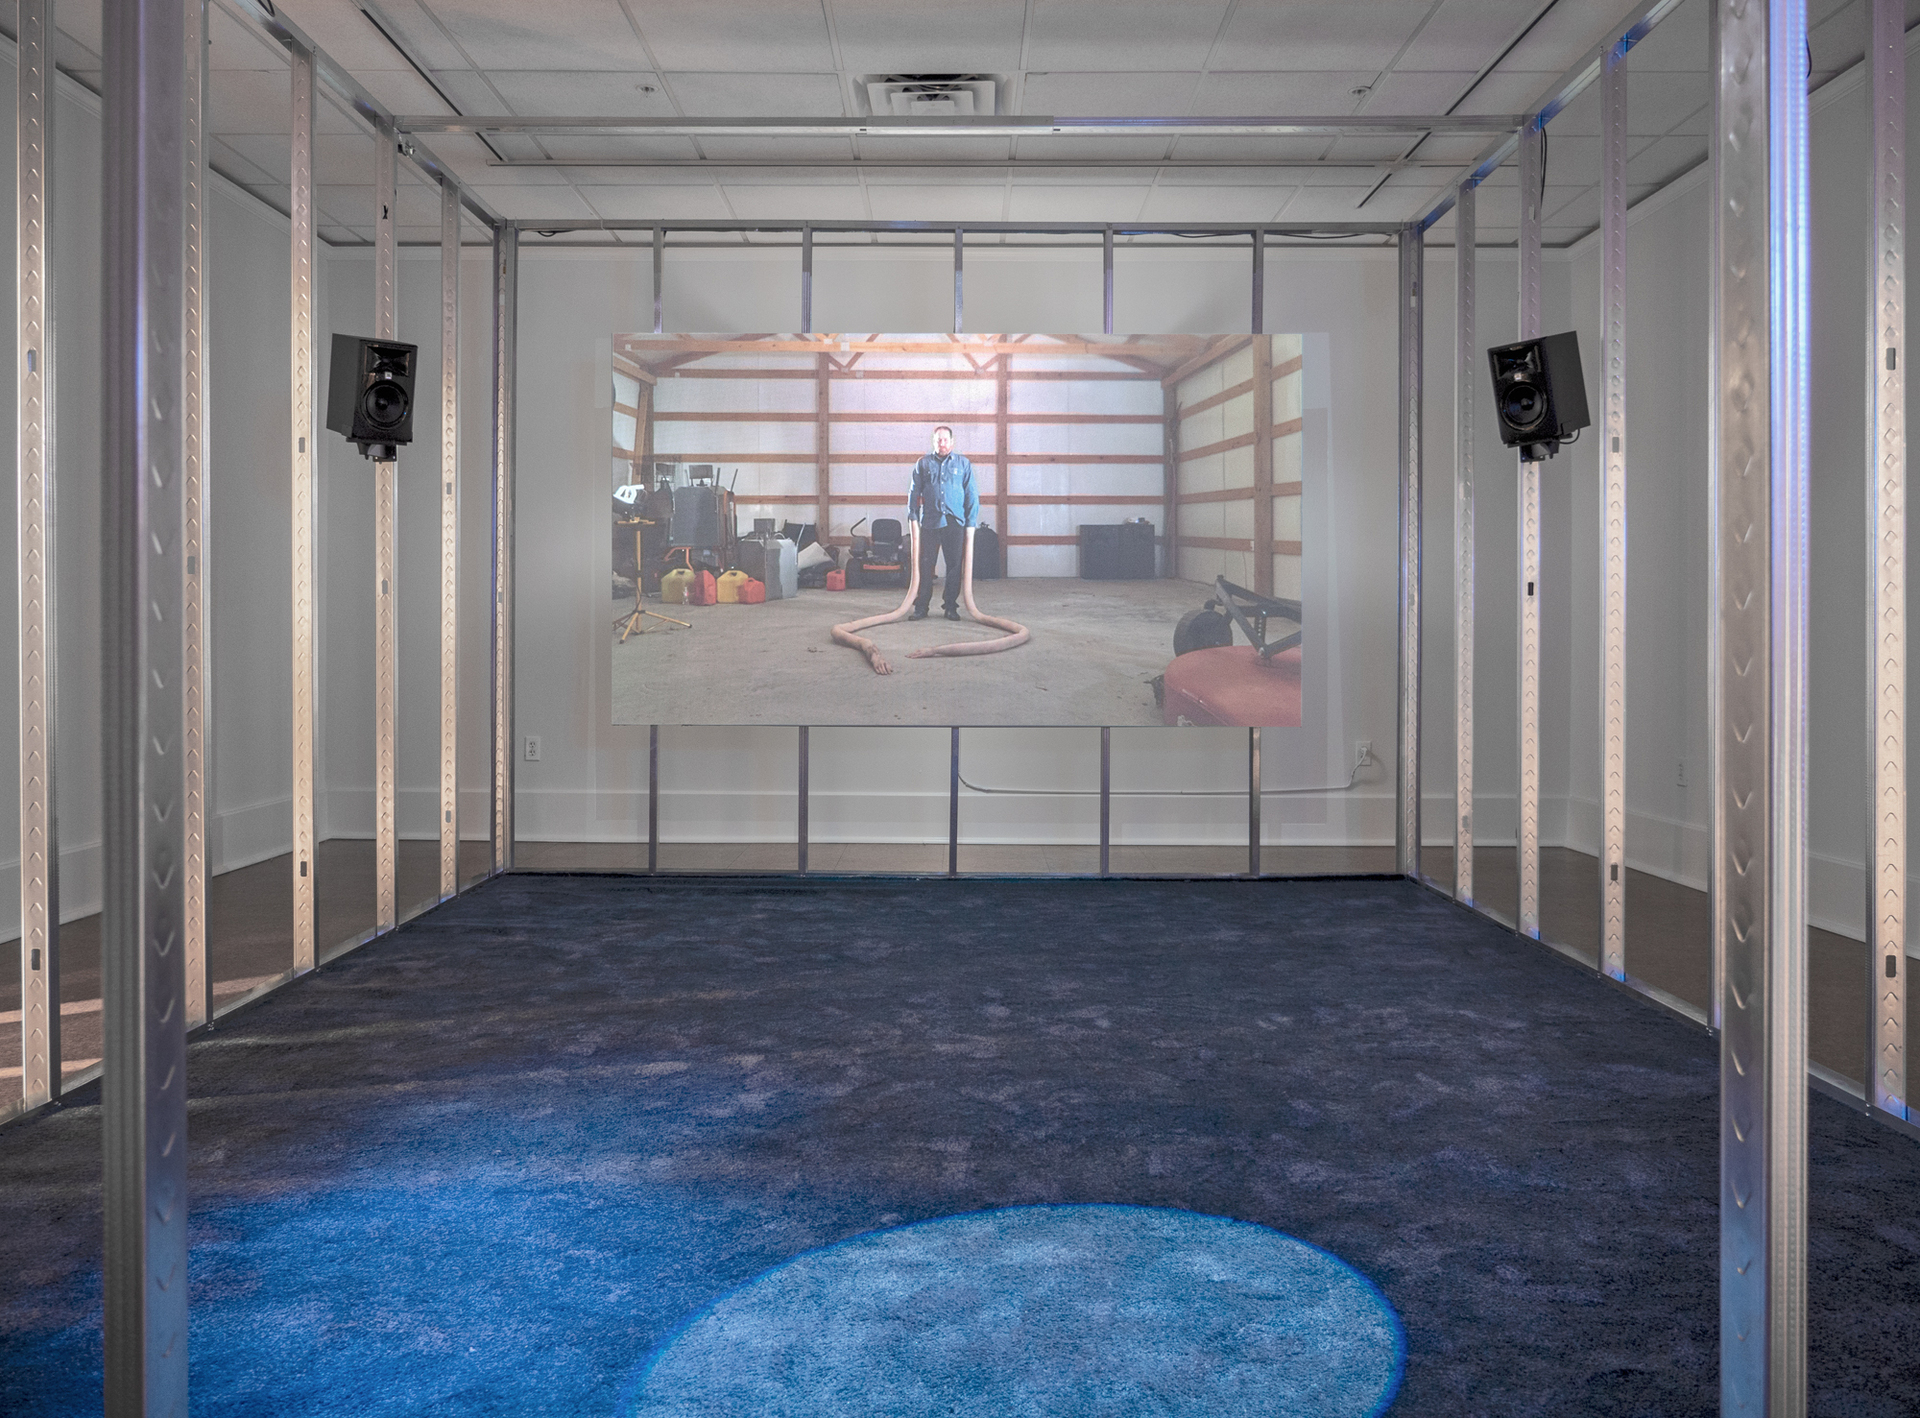 Untitled (blue), 2019; 1080p video projection with sound, blue carpet, drywall, steel studs, door strip curtain, neon signage, speakers, various cables and hardware; installation dimensions variable; video TRT of 7 minutes and 30 seconds, looped